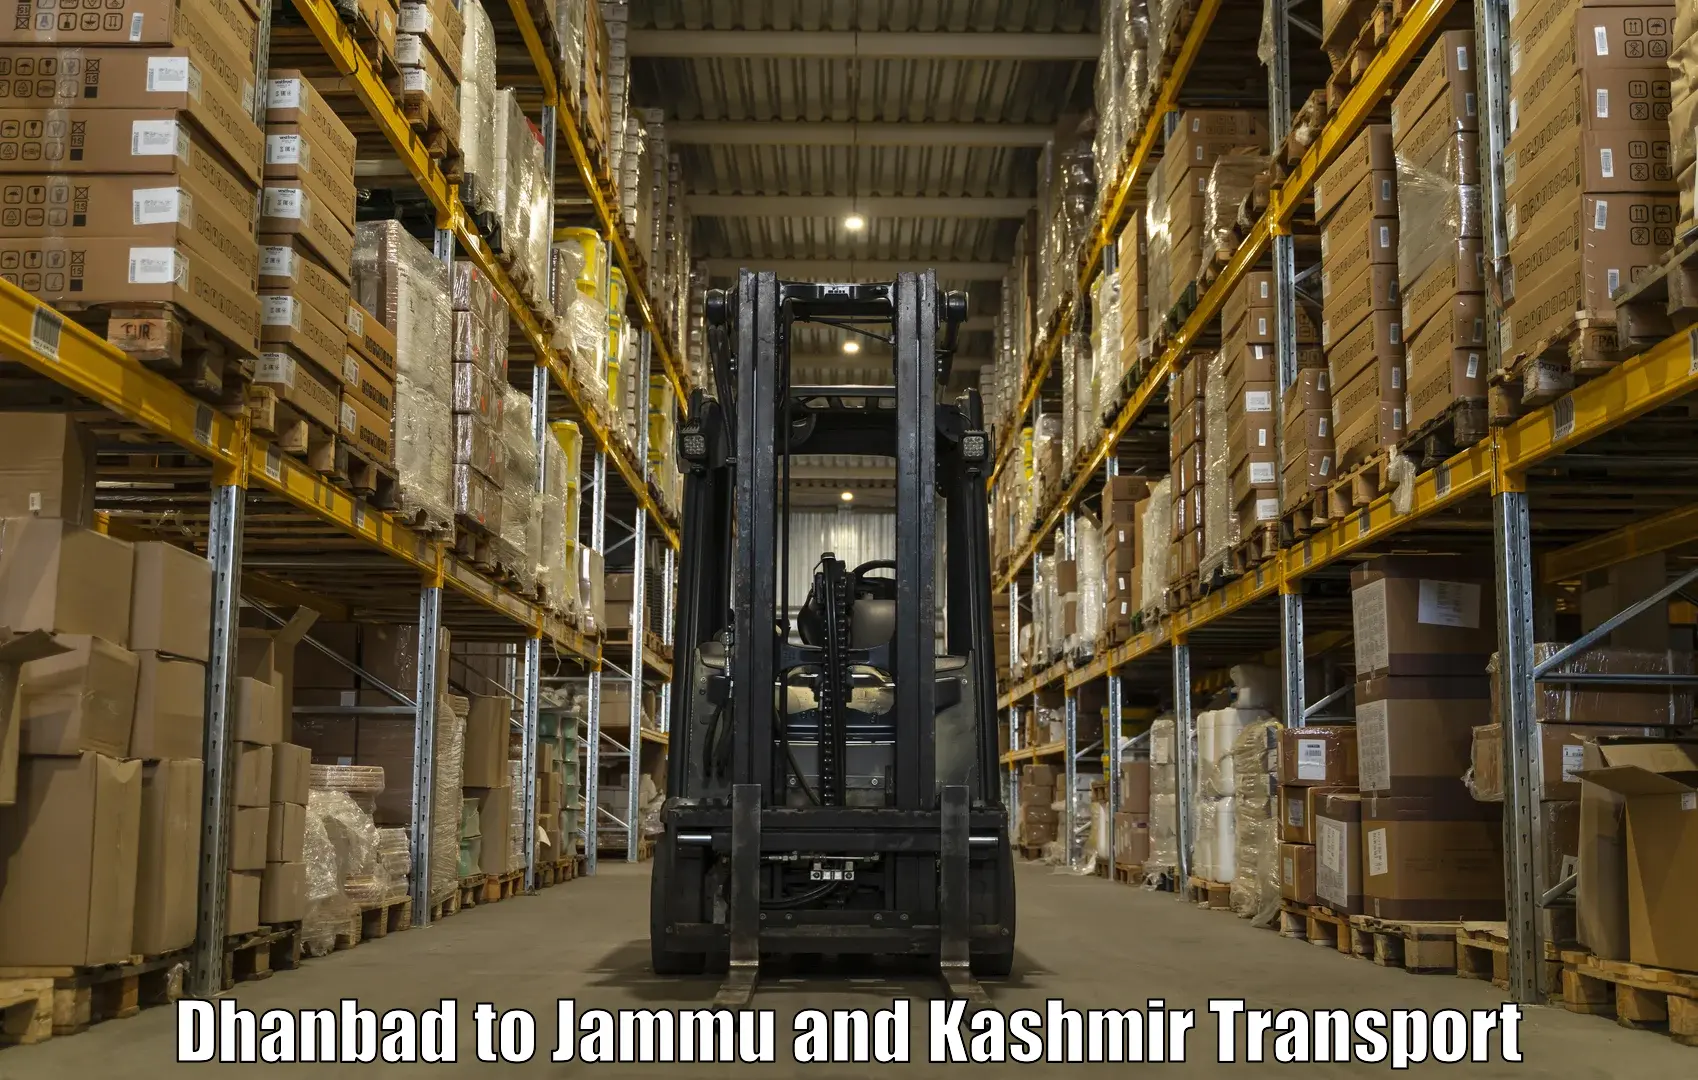 Truck transport companies in India Dhanbad to Budgam